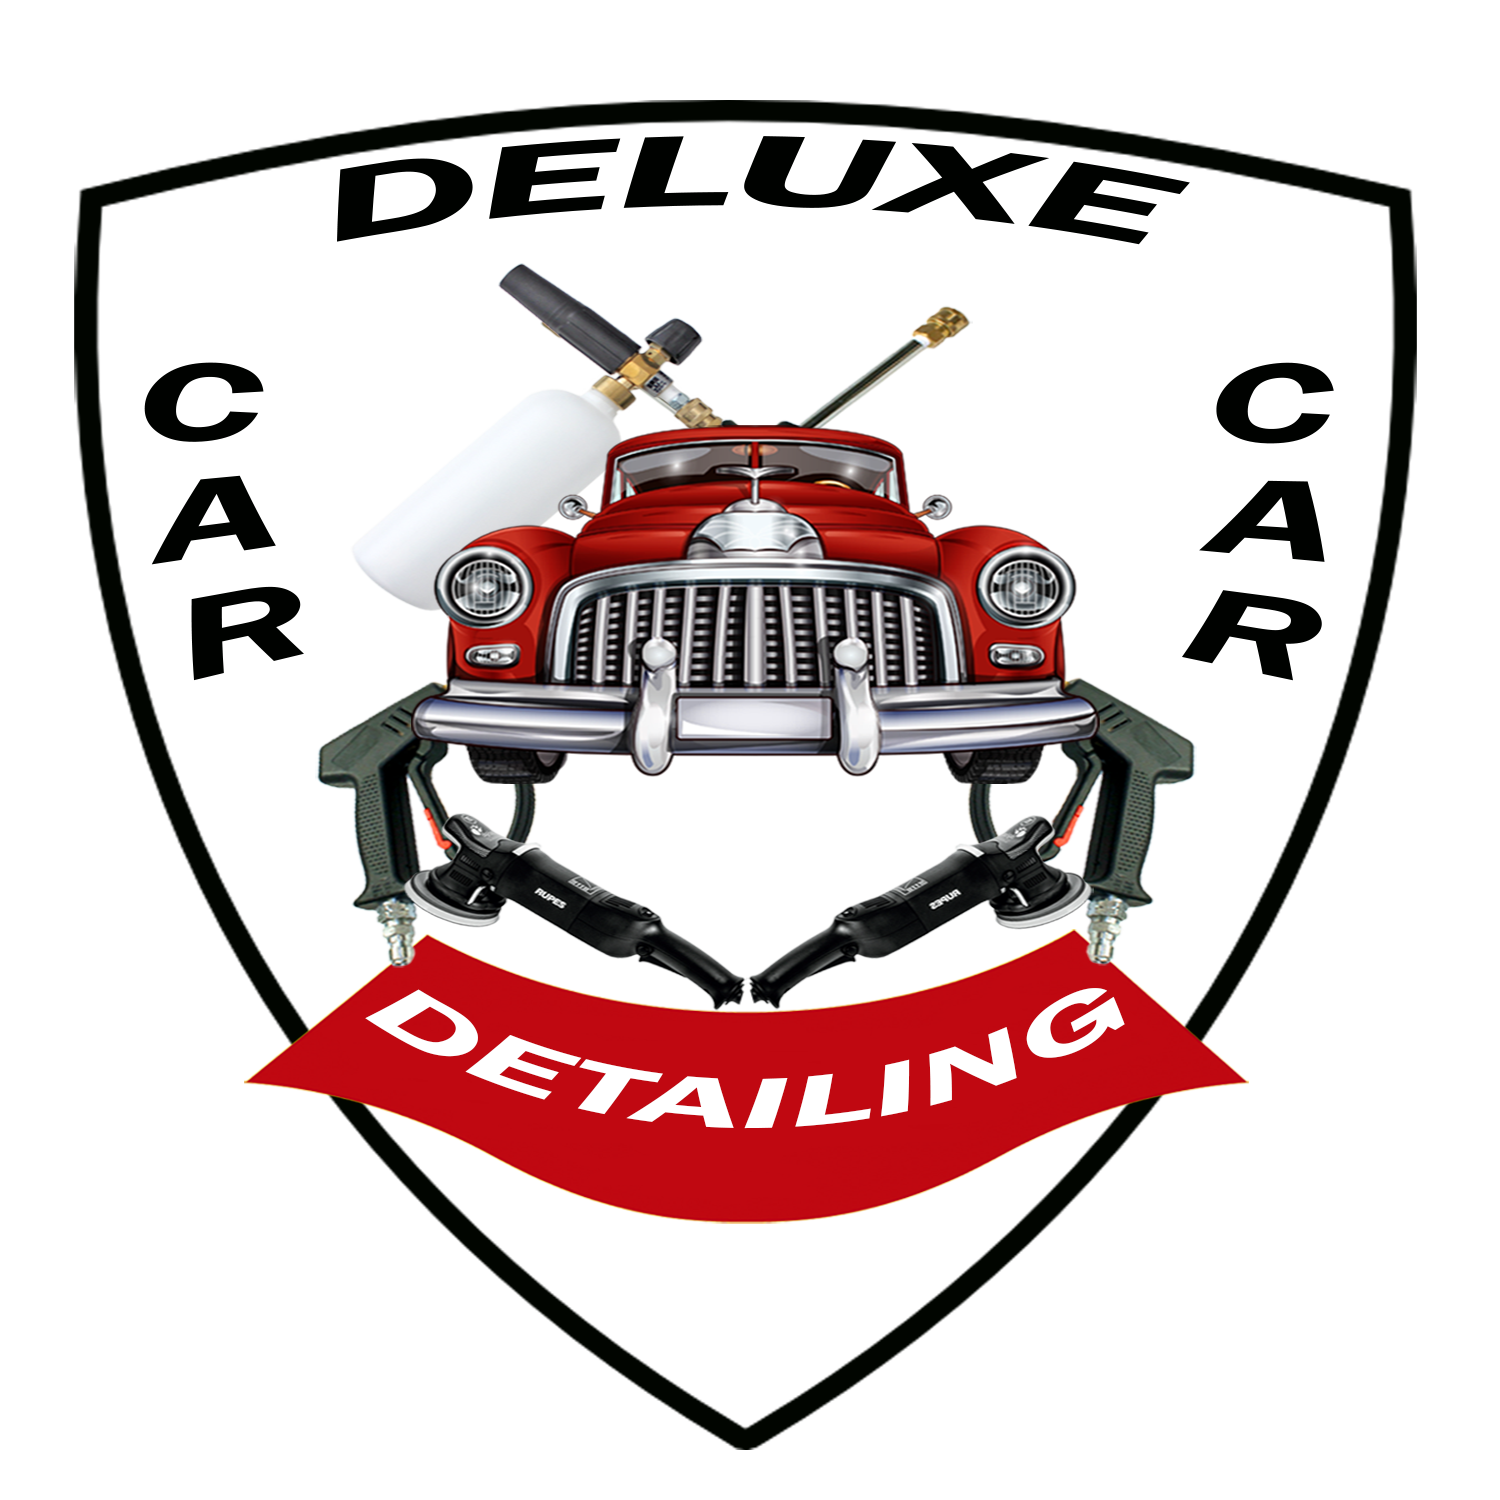 deluxe-cardetailing.com